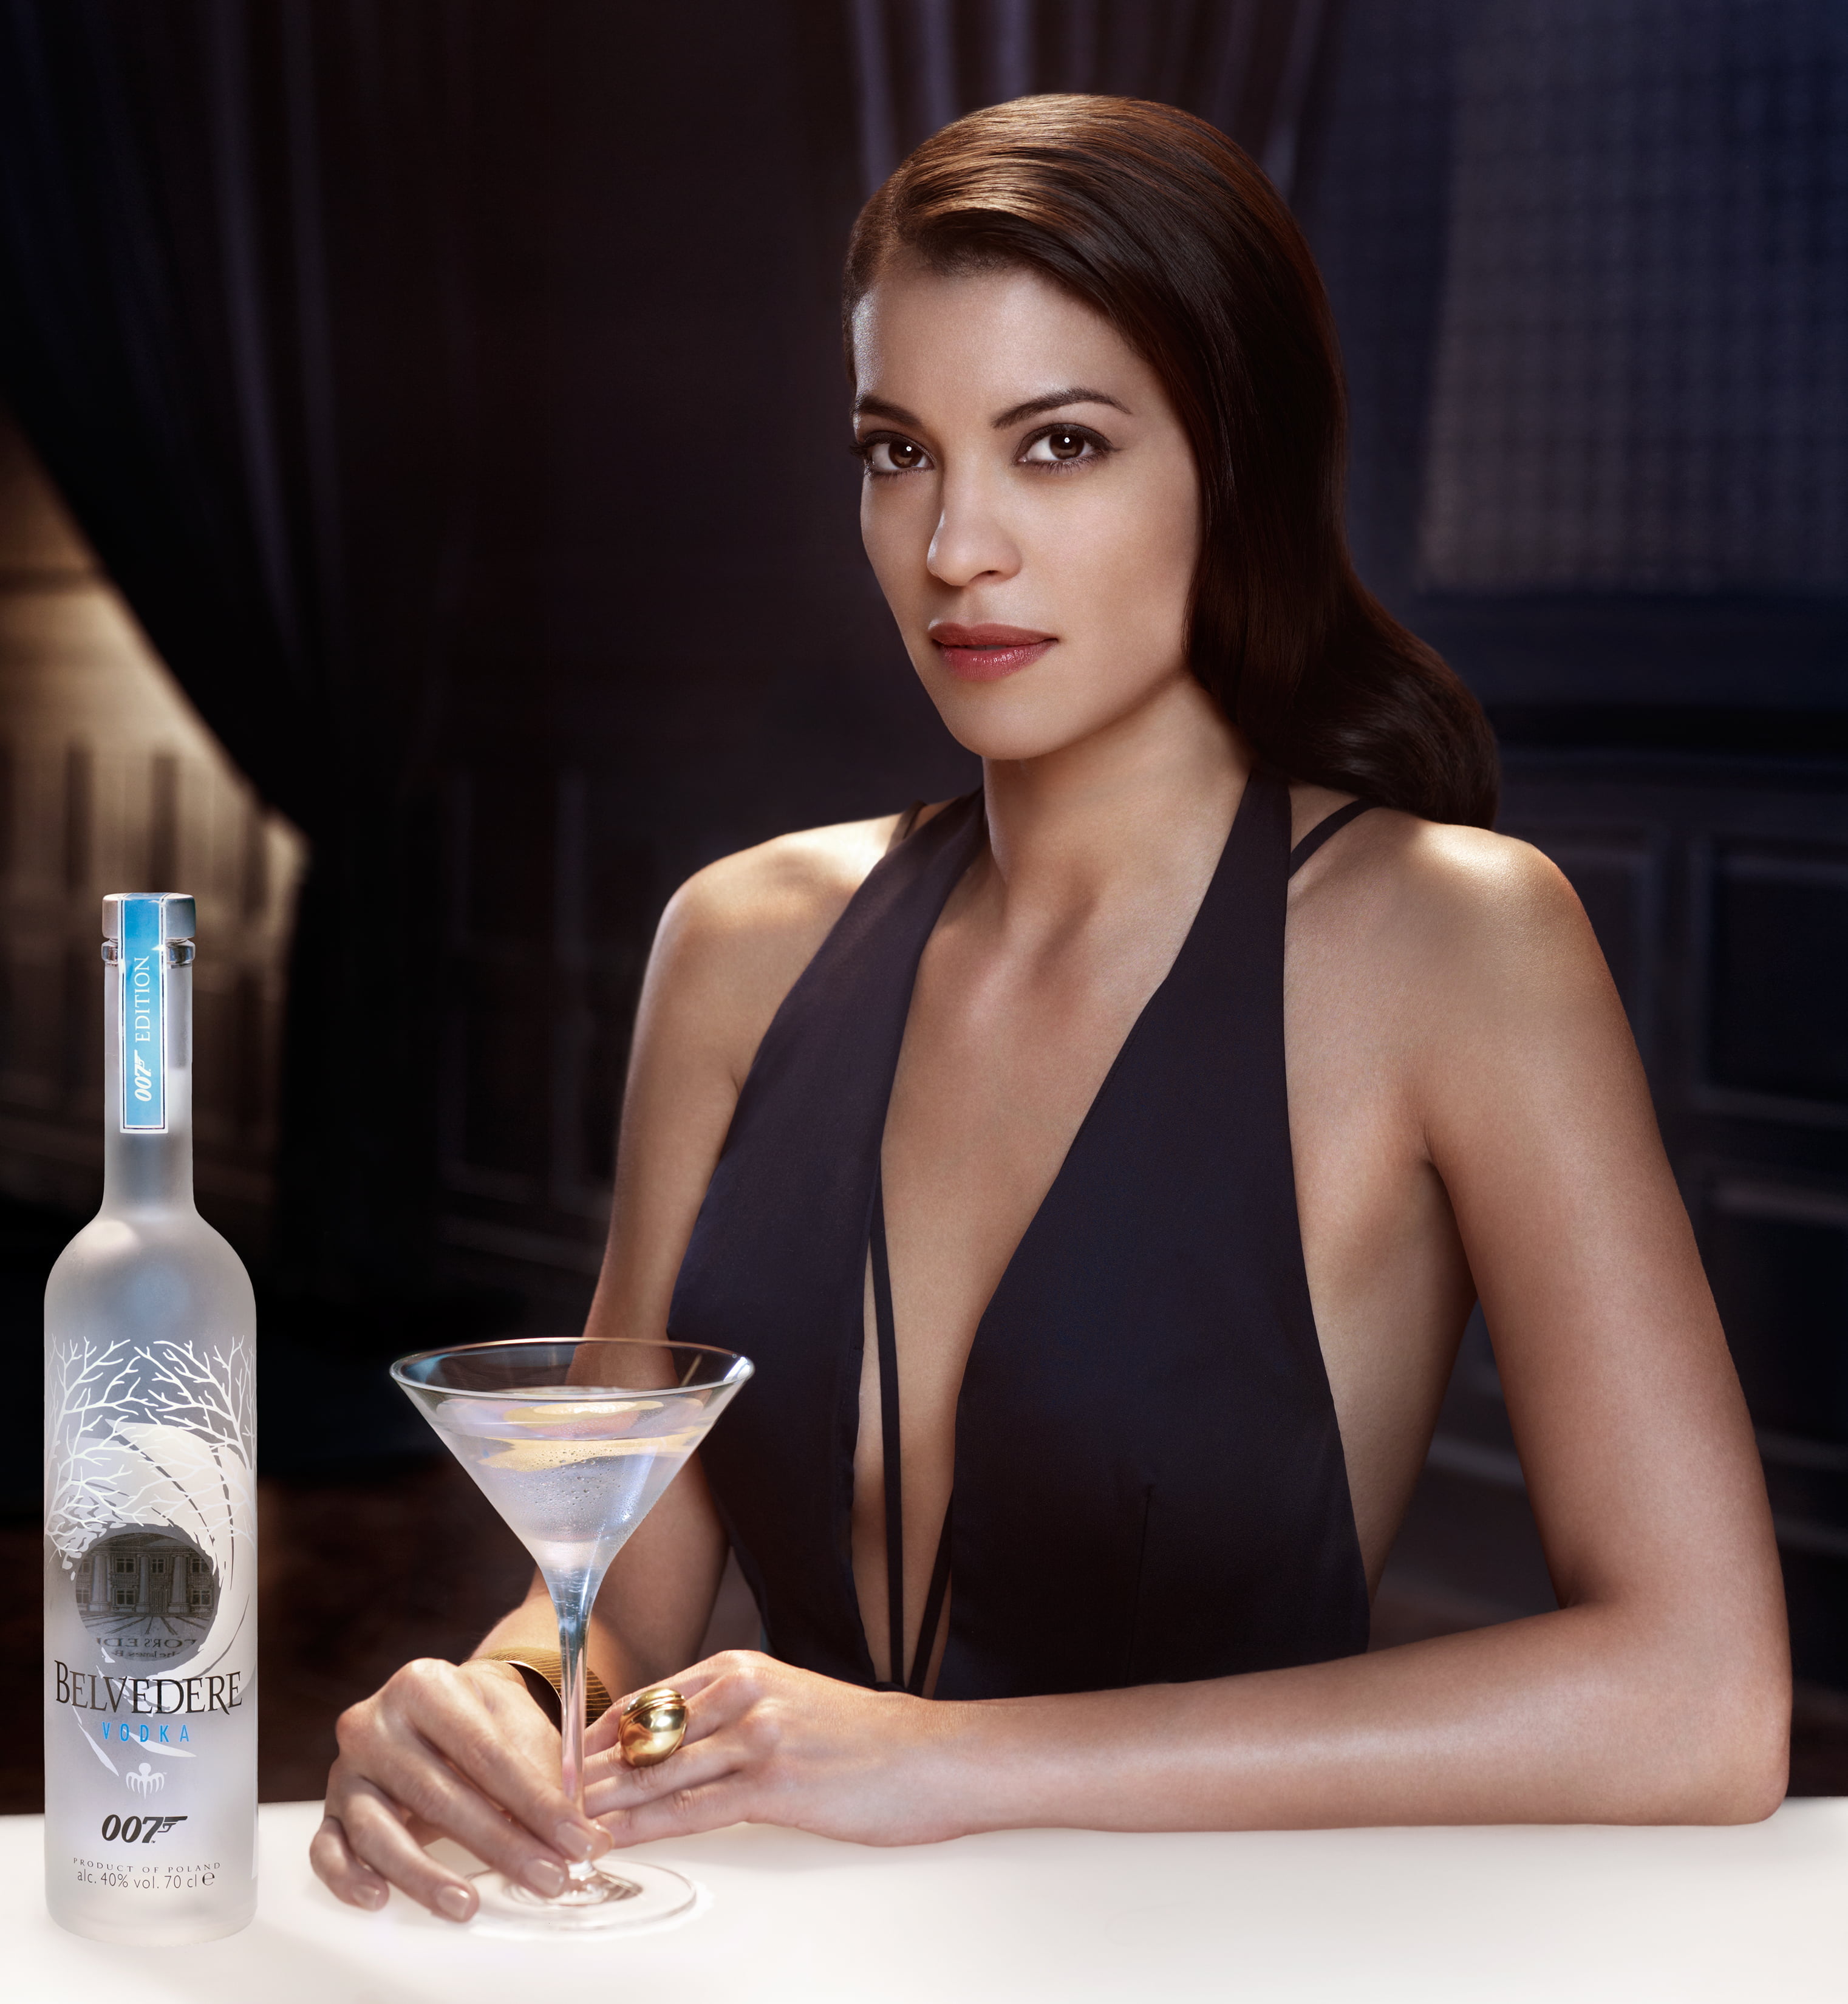 Stephanie Sigman and Belvedere 007 Spectre limited edition bottle